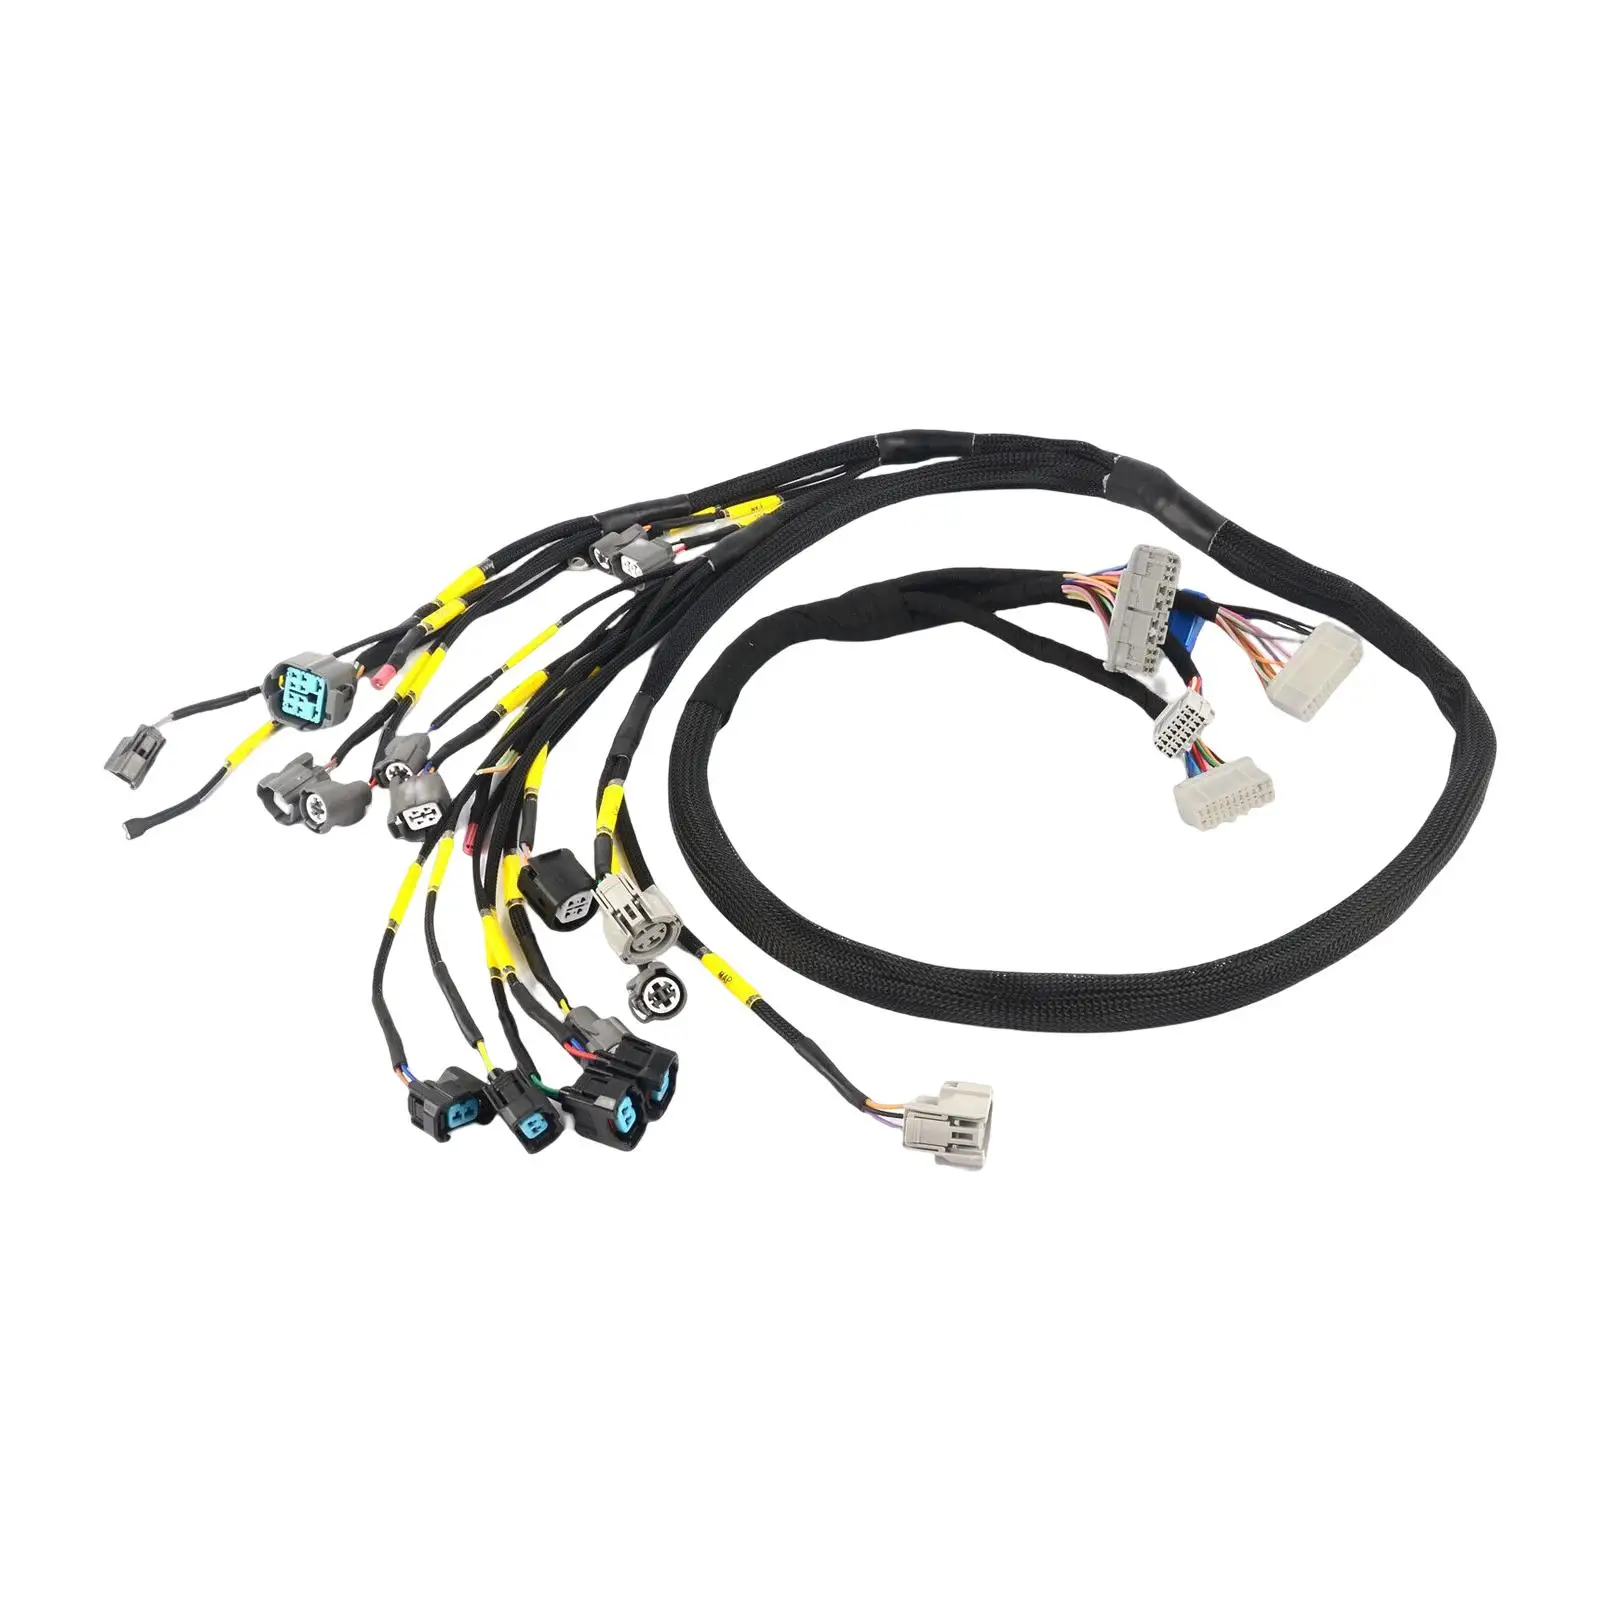 Car Engine Harness Cnch-Obd2-1 Automotive Accessories Replaces Spare Parts Stable professional